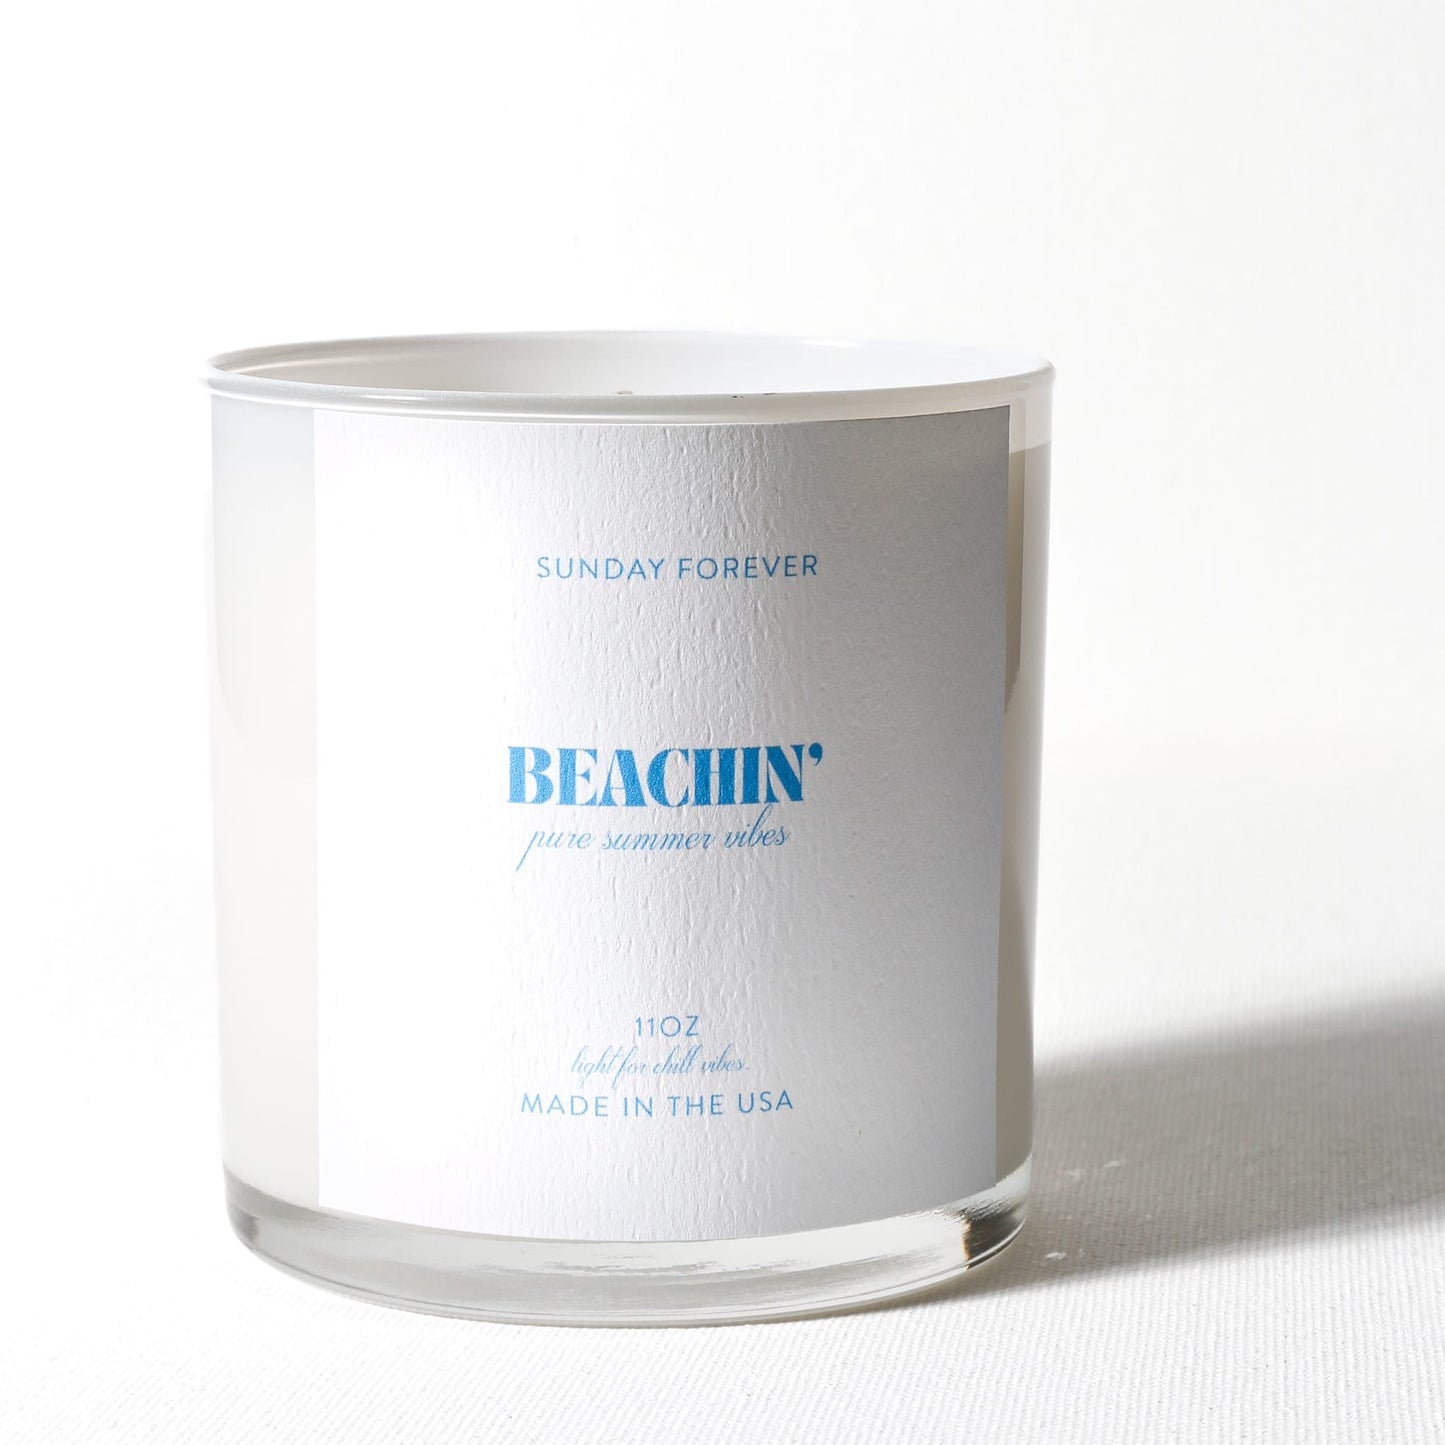 Sunday Forever Candles Beachin' Luxury Candle with Cream Coconut